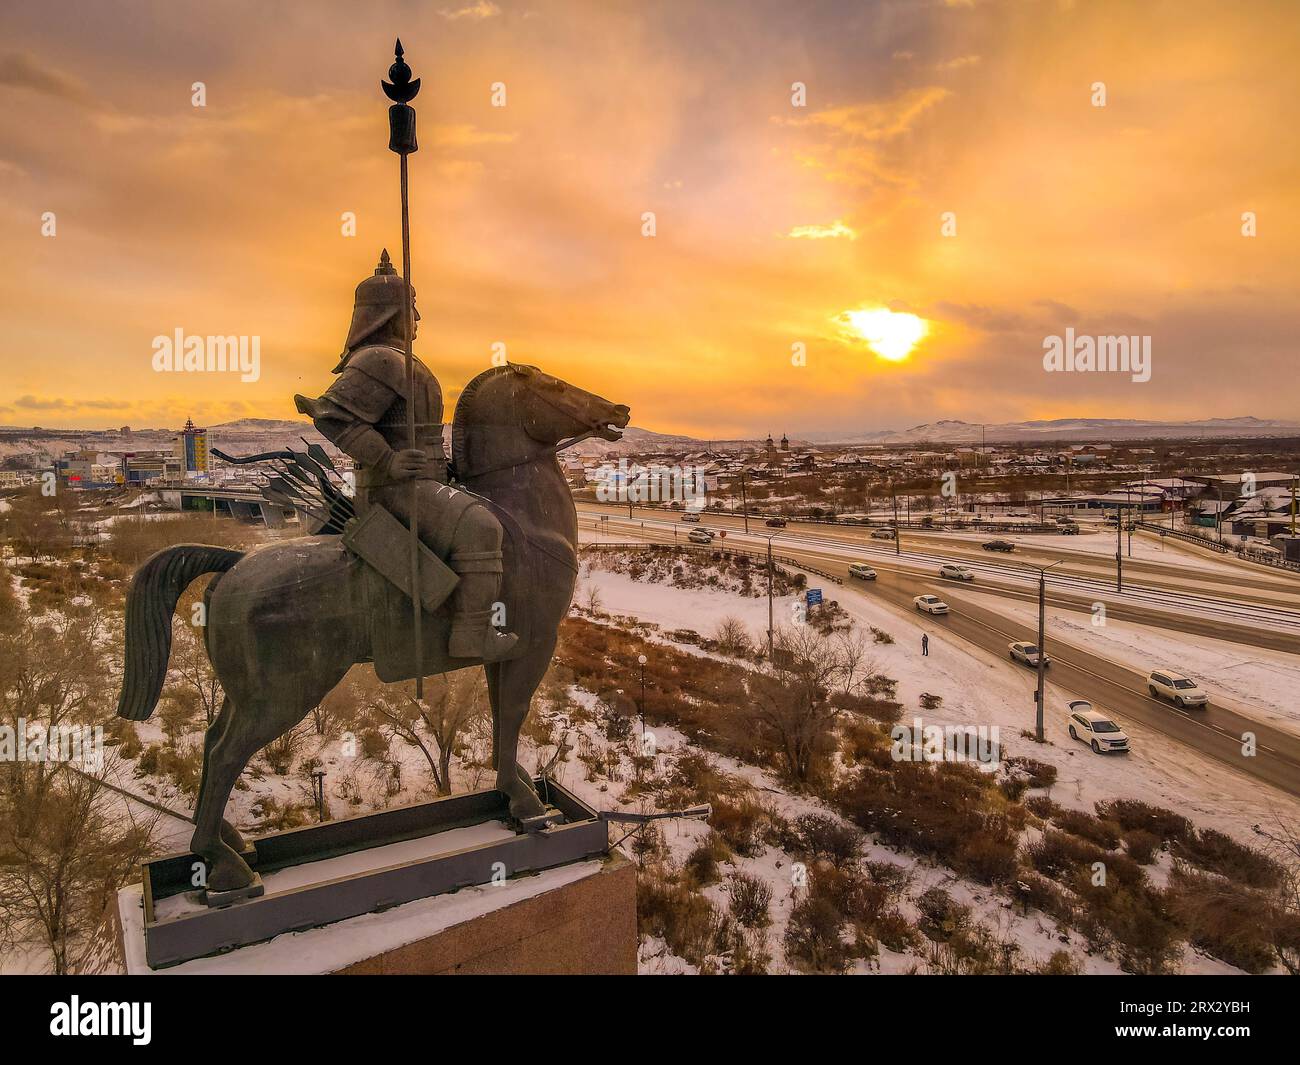 The old Soviet bronze statue of the Gesser, a mythological Buryat and Mongol hero, on the horse in the downtown of Ulan-Ude in Buryatiya, Russia. Stock Photo